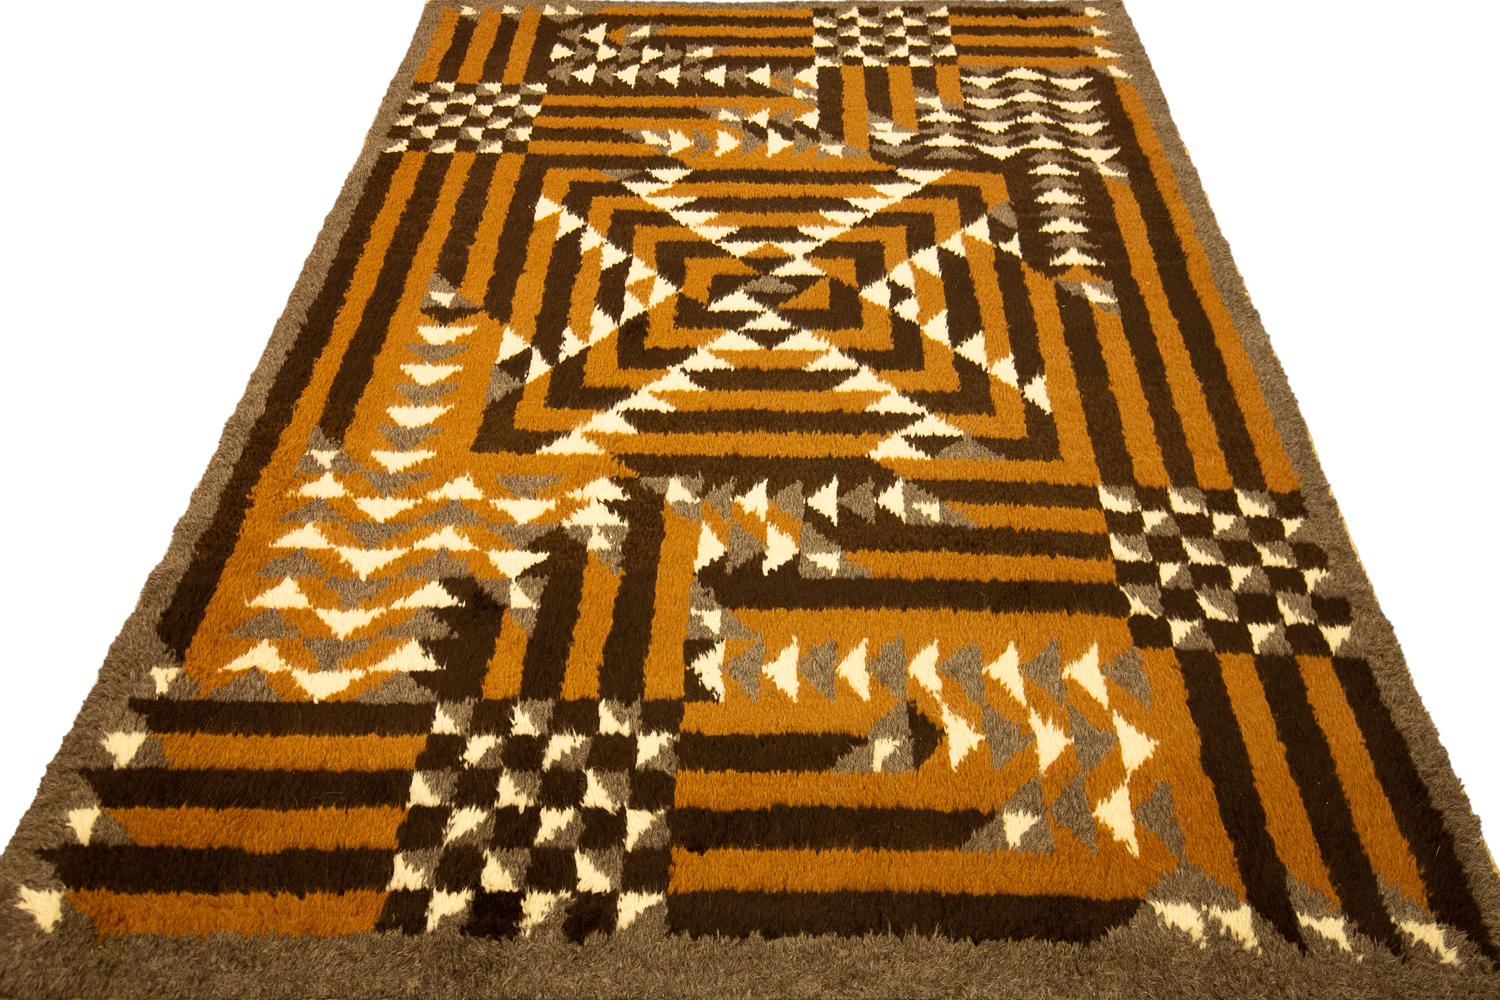 Other Art Deco European Rug with Checkerboard and Labyrinth Design, 1920-1950 For Sale